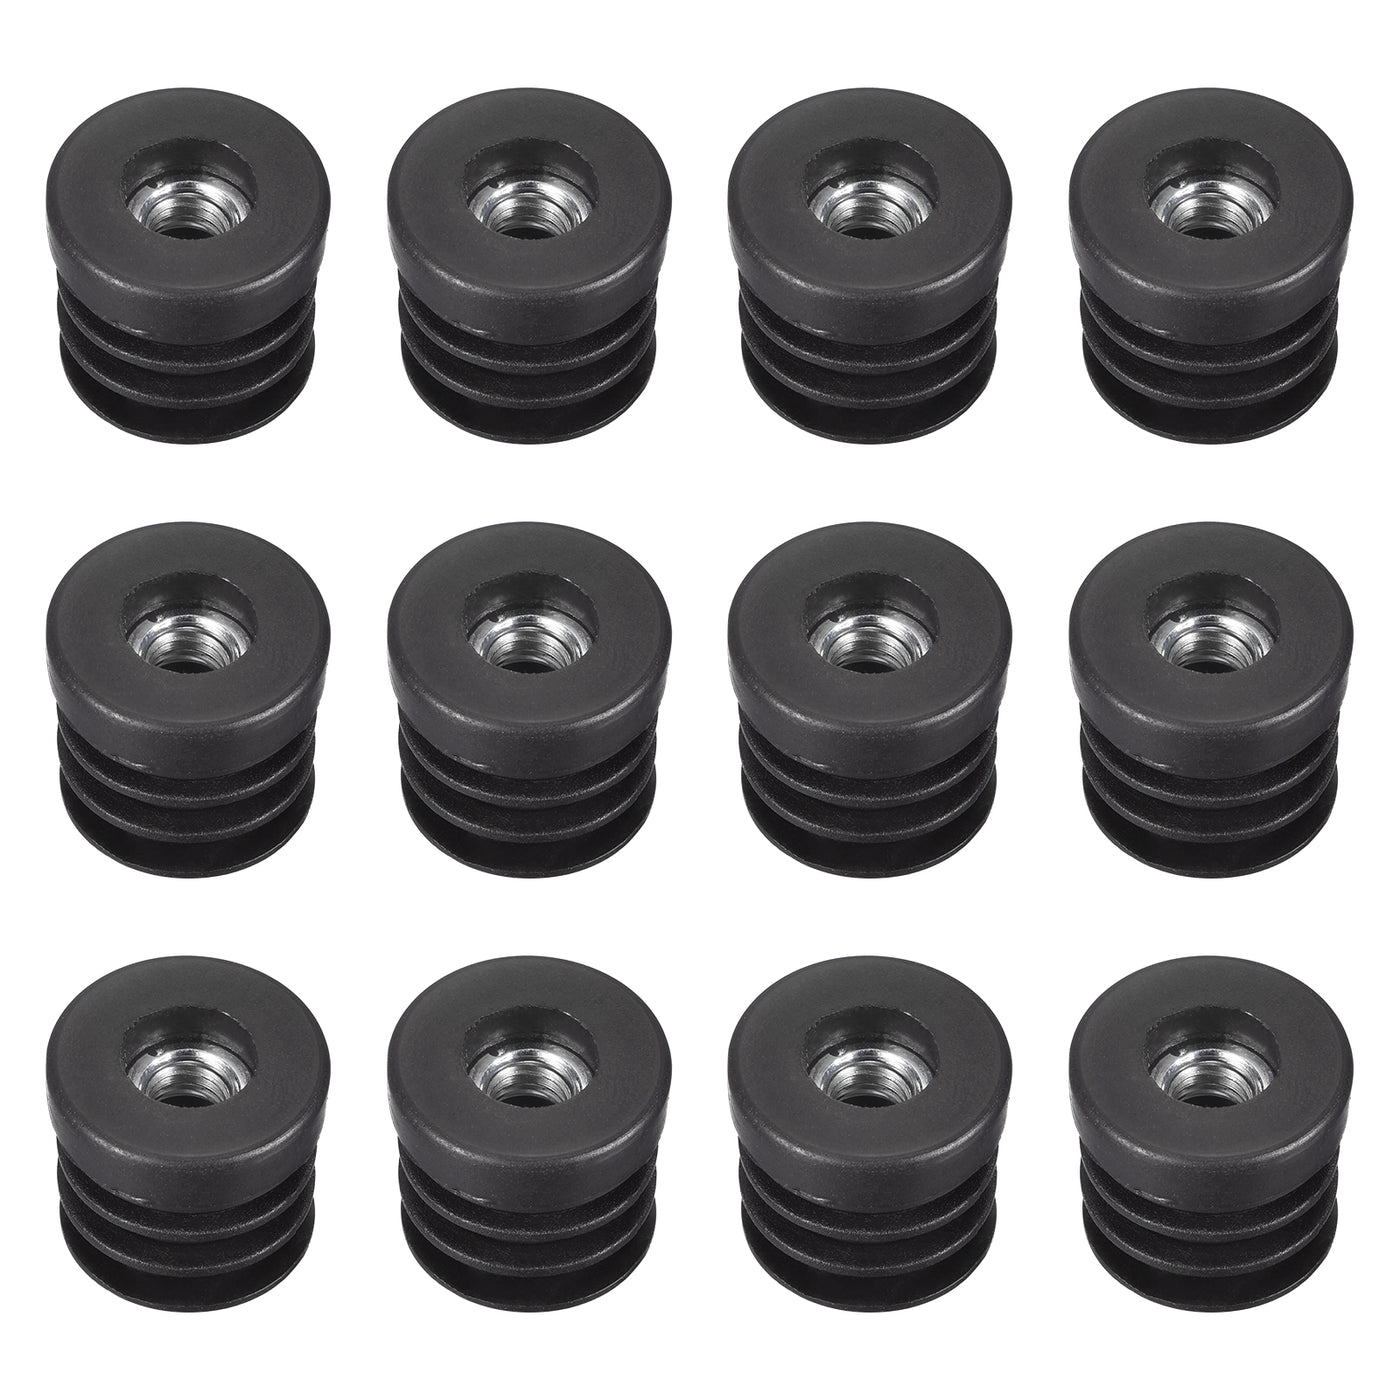 uxcell Uxcell 12Pcs 25mm/0.98" Caster Insert with Thread, Round M8 Thread for Furniture